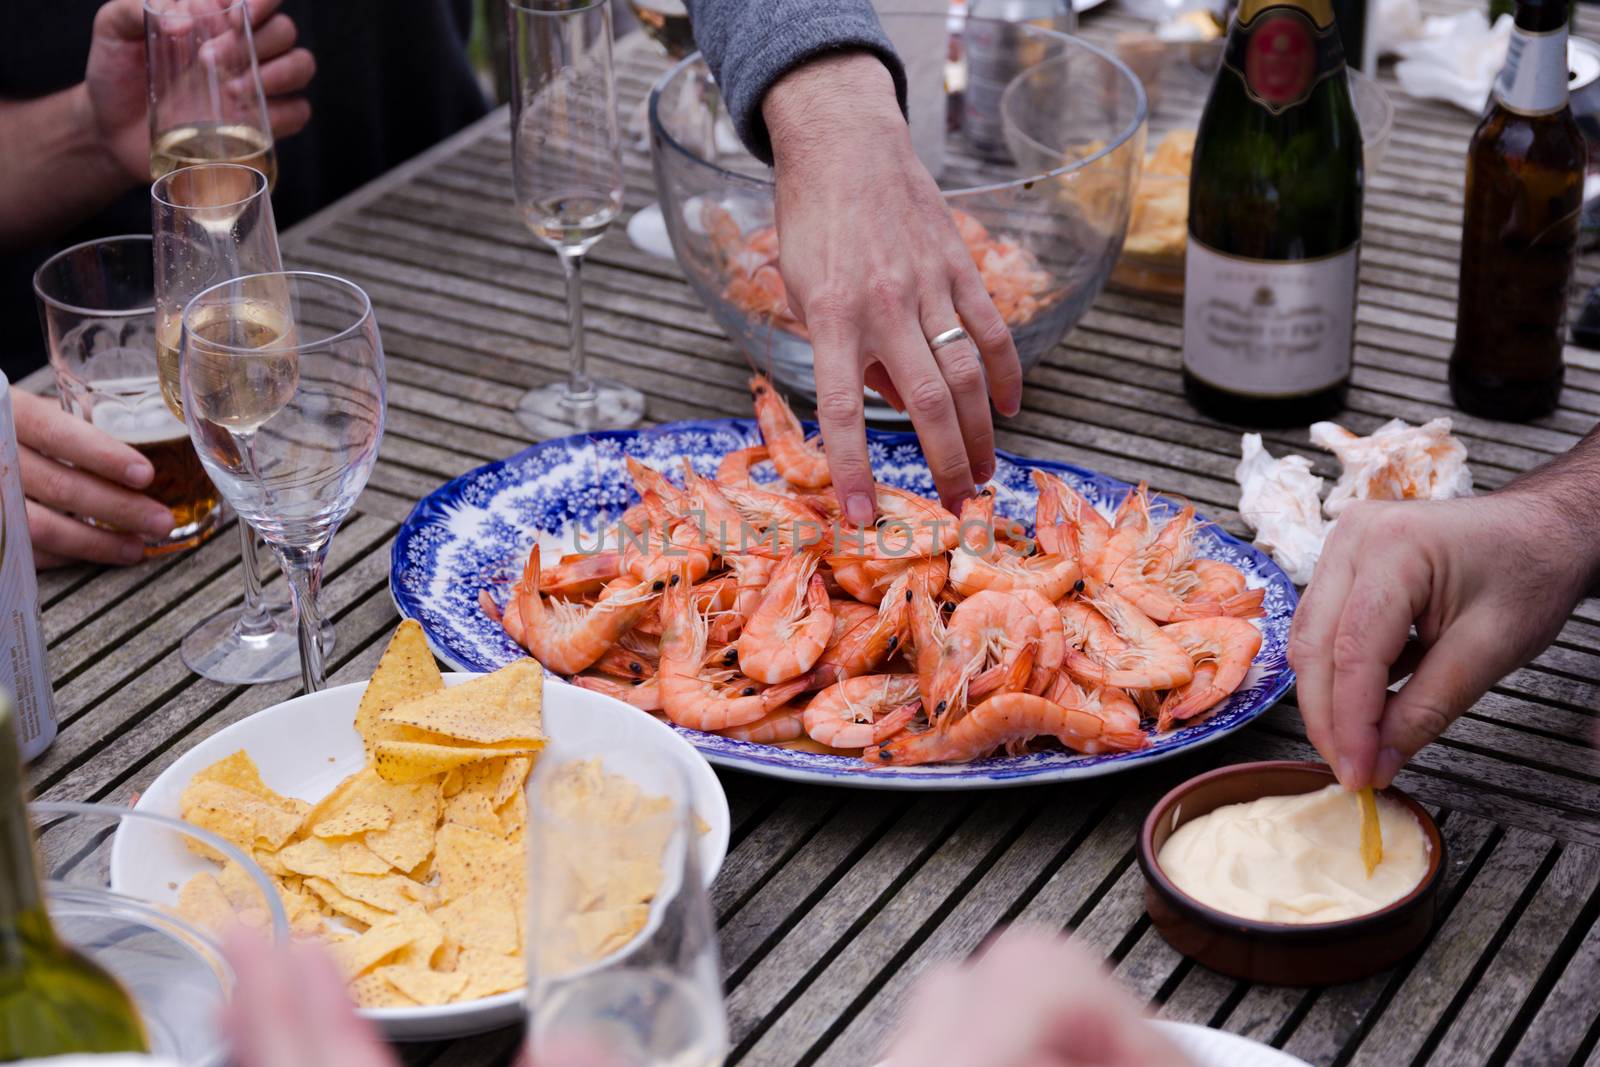 Friends aharing a plate of prawns at a social gathering